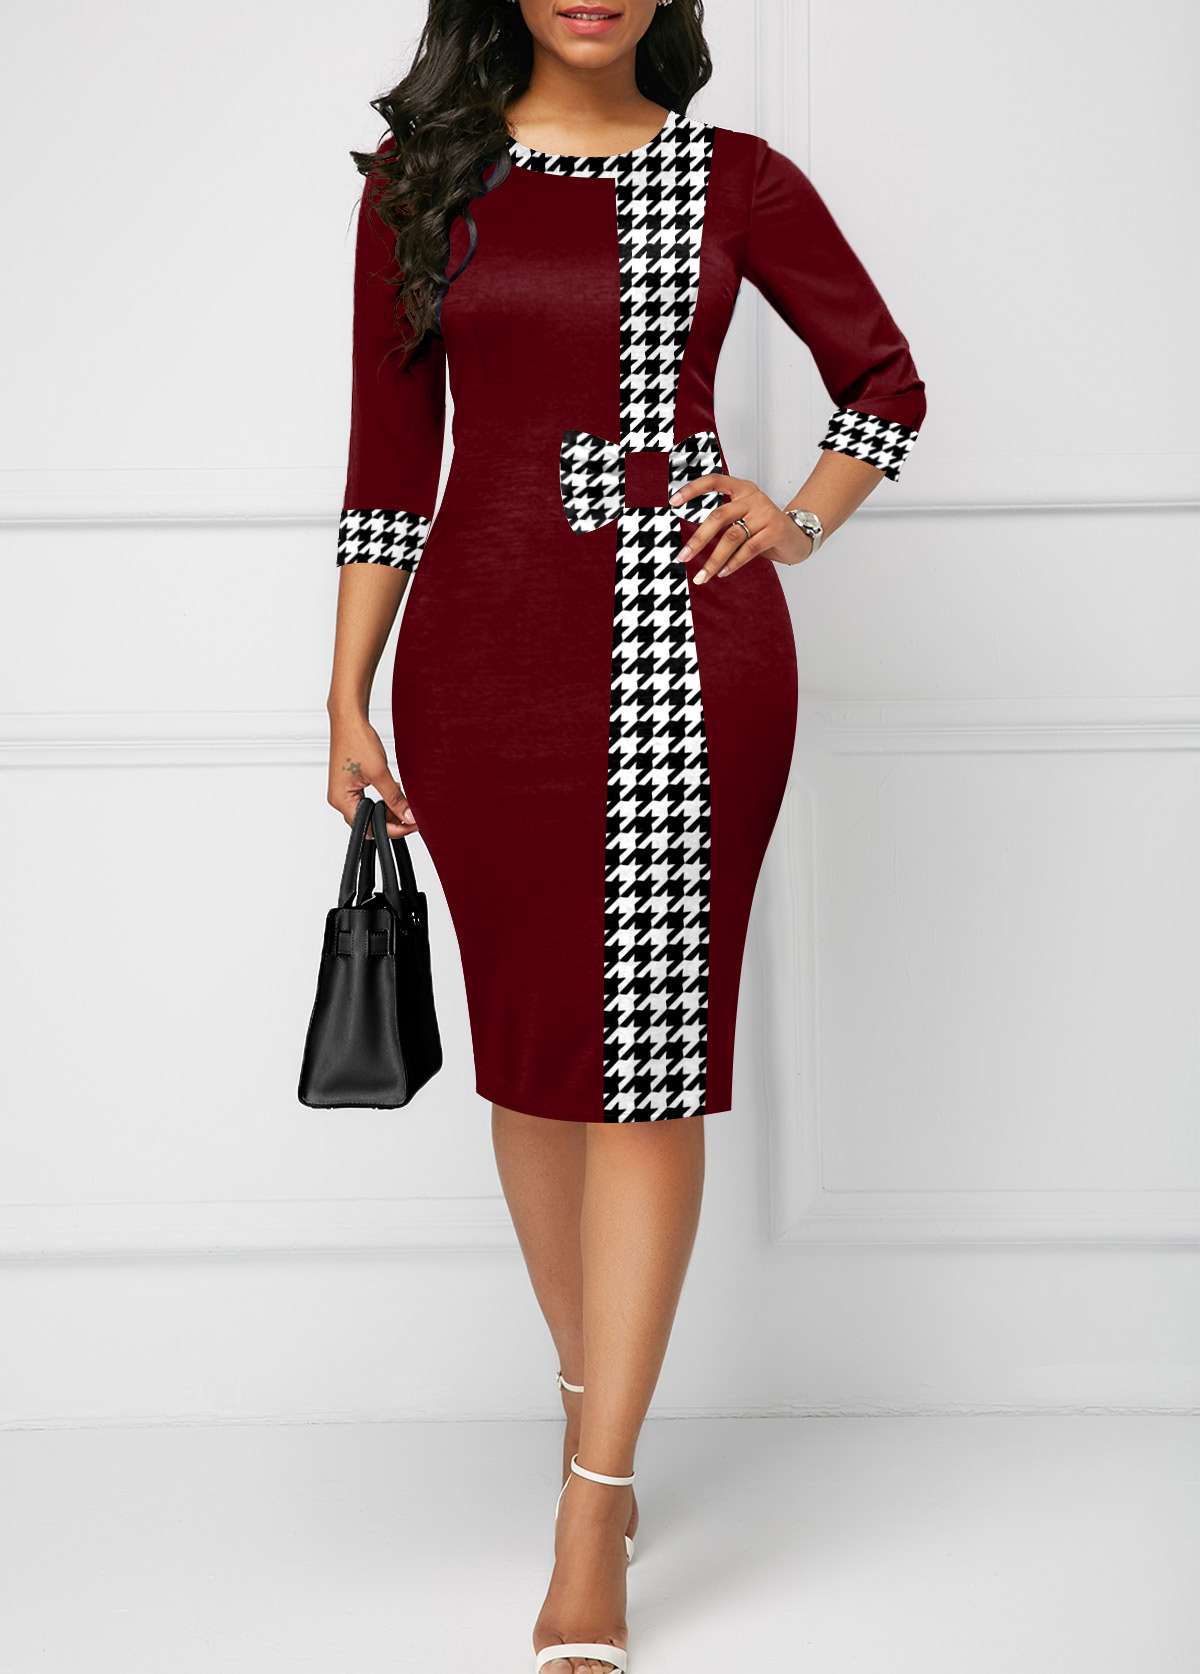 Houndstooth Print Bowknot Deep Red Bodycon Dress